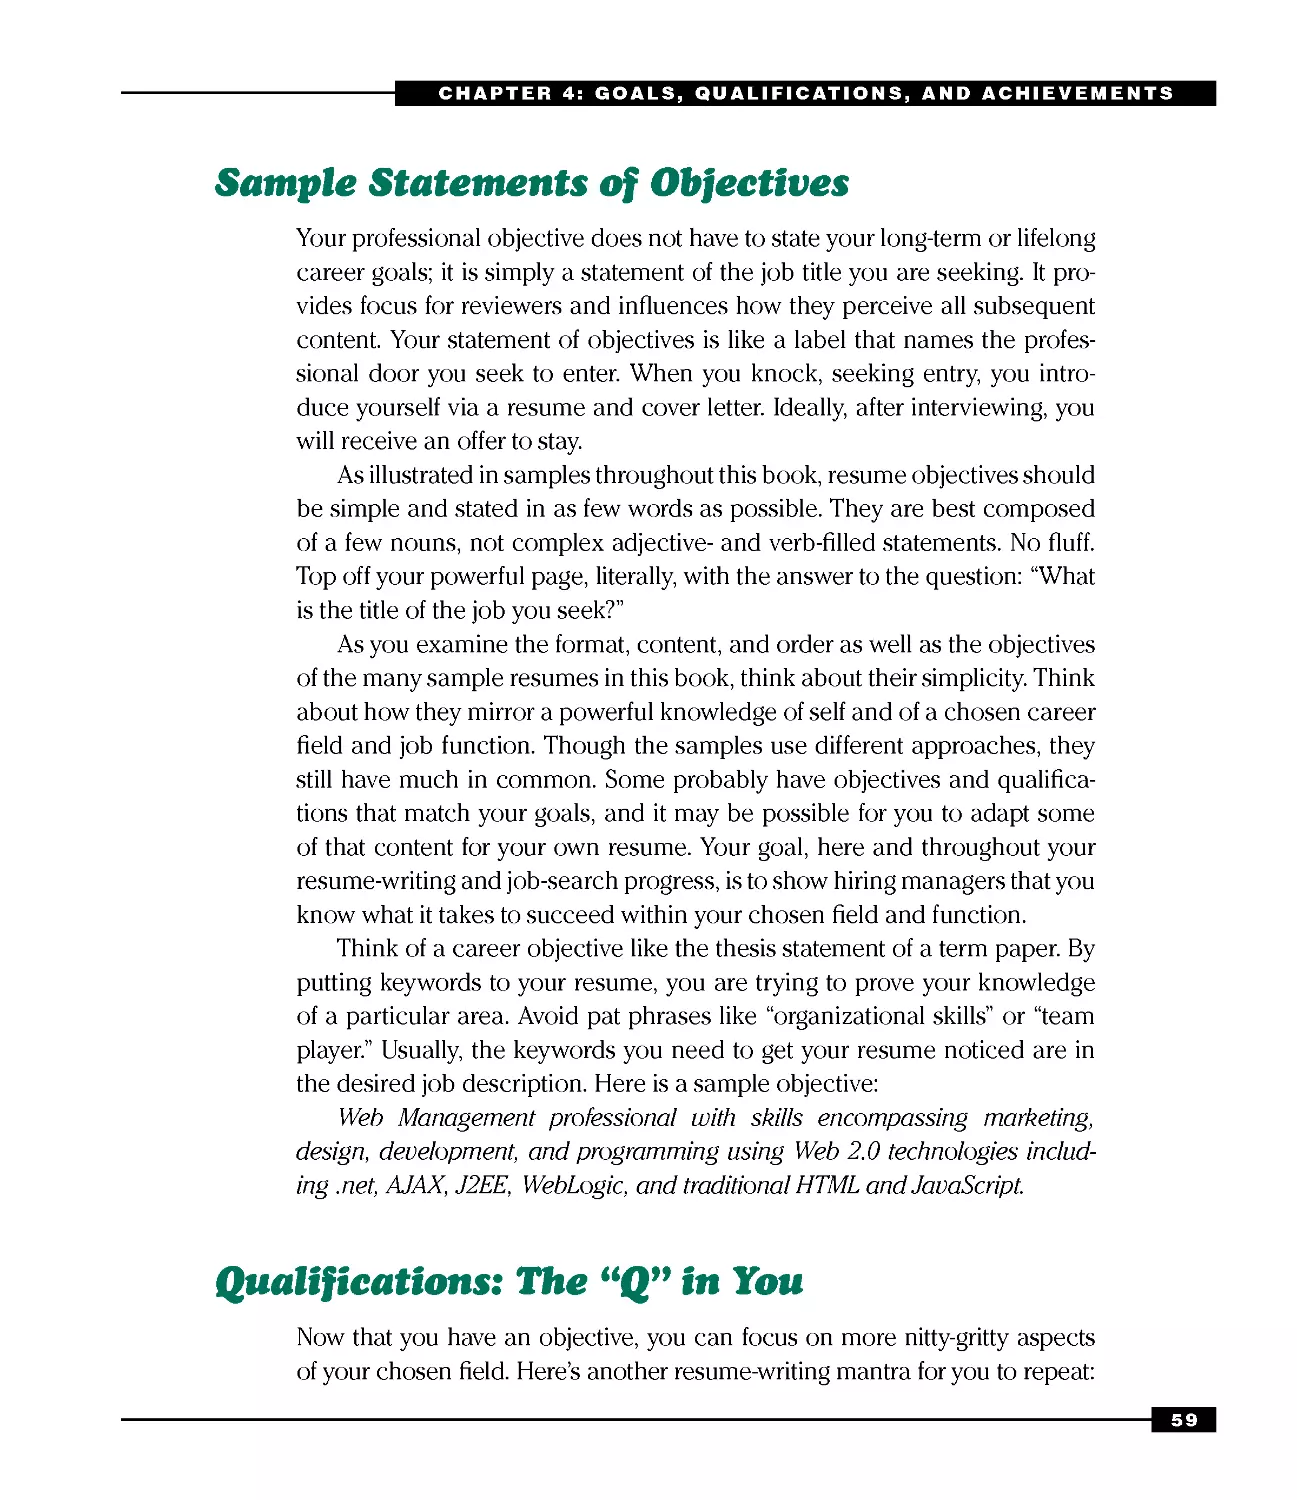 Sample Statements of Objectives
Qualifications: The “Q” in You